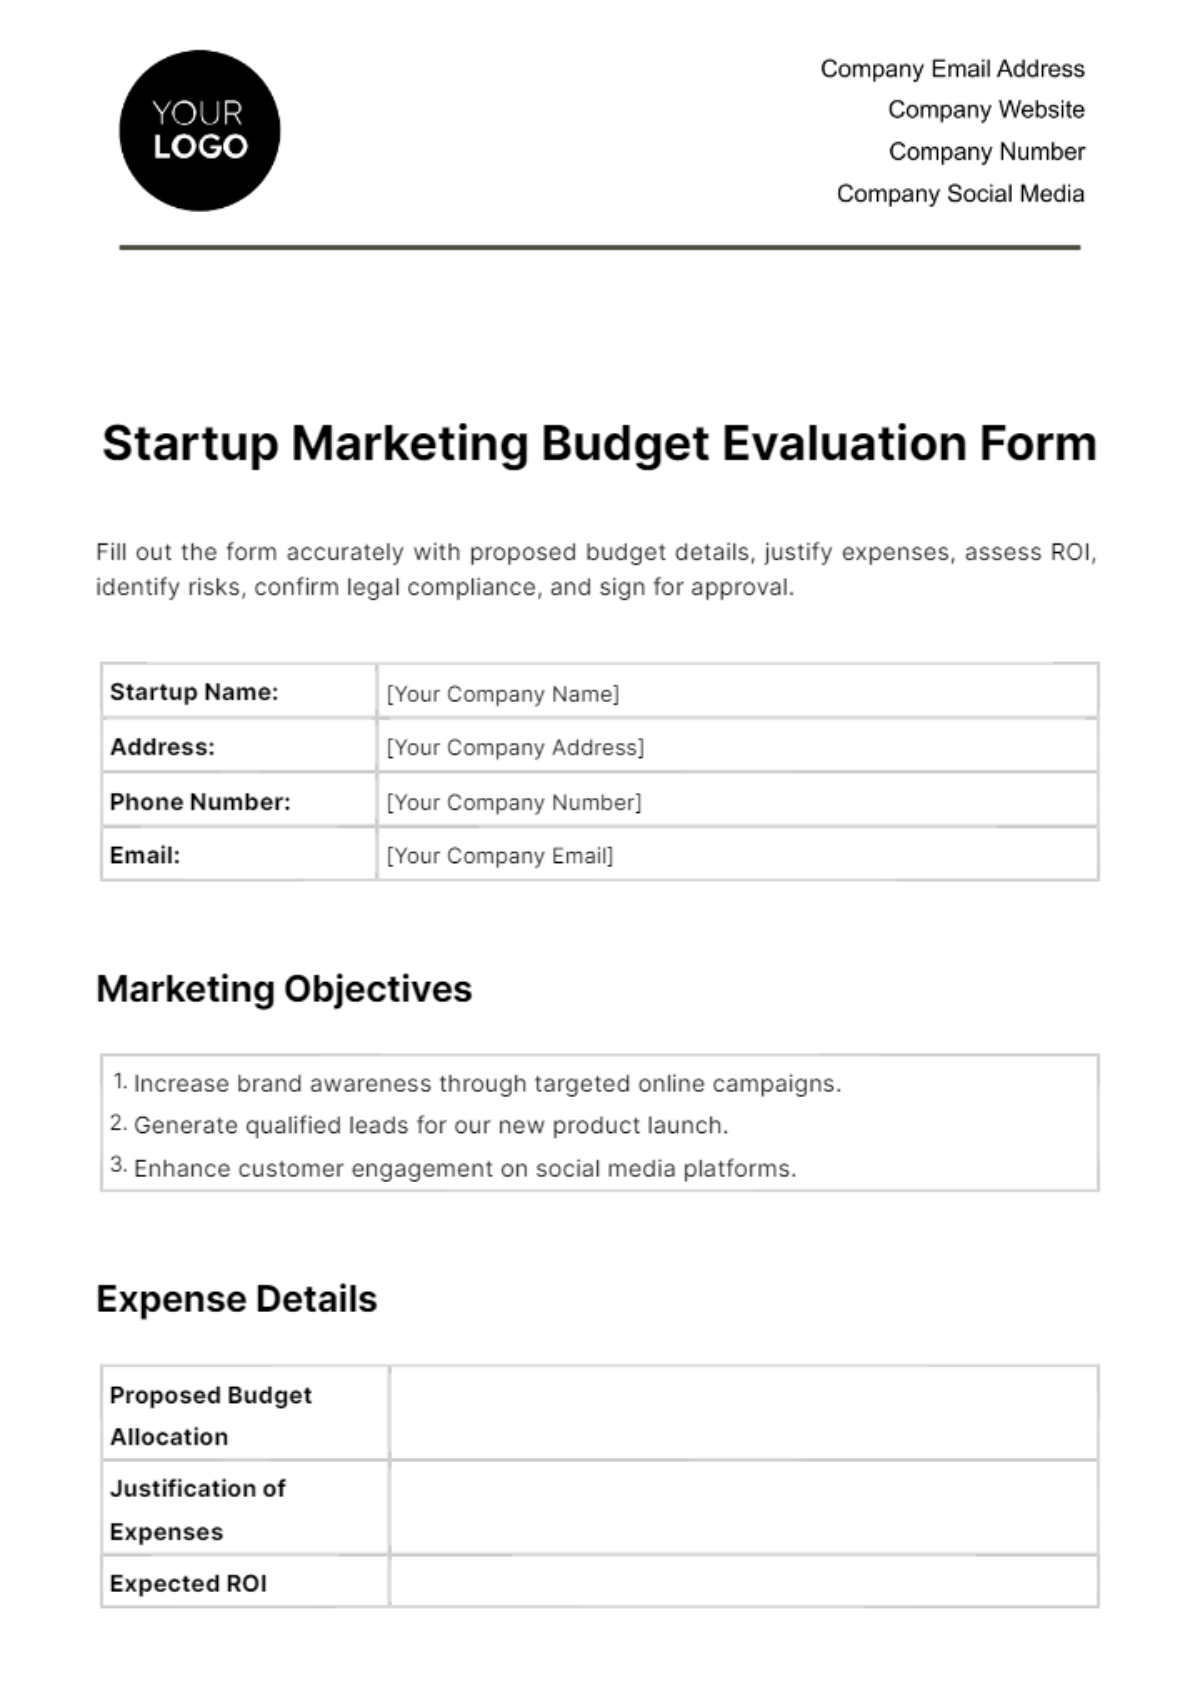 Free Startup Marketing Budget Evaluation Form Template